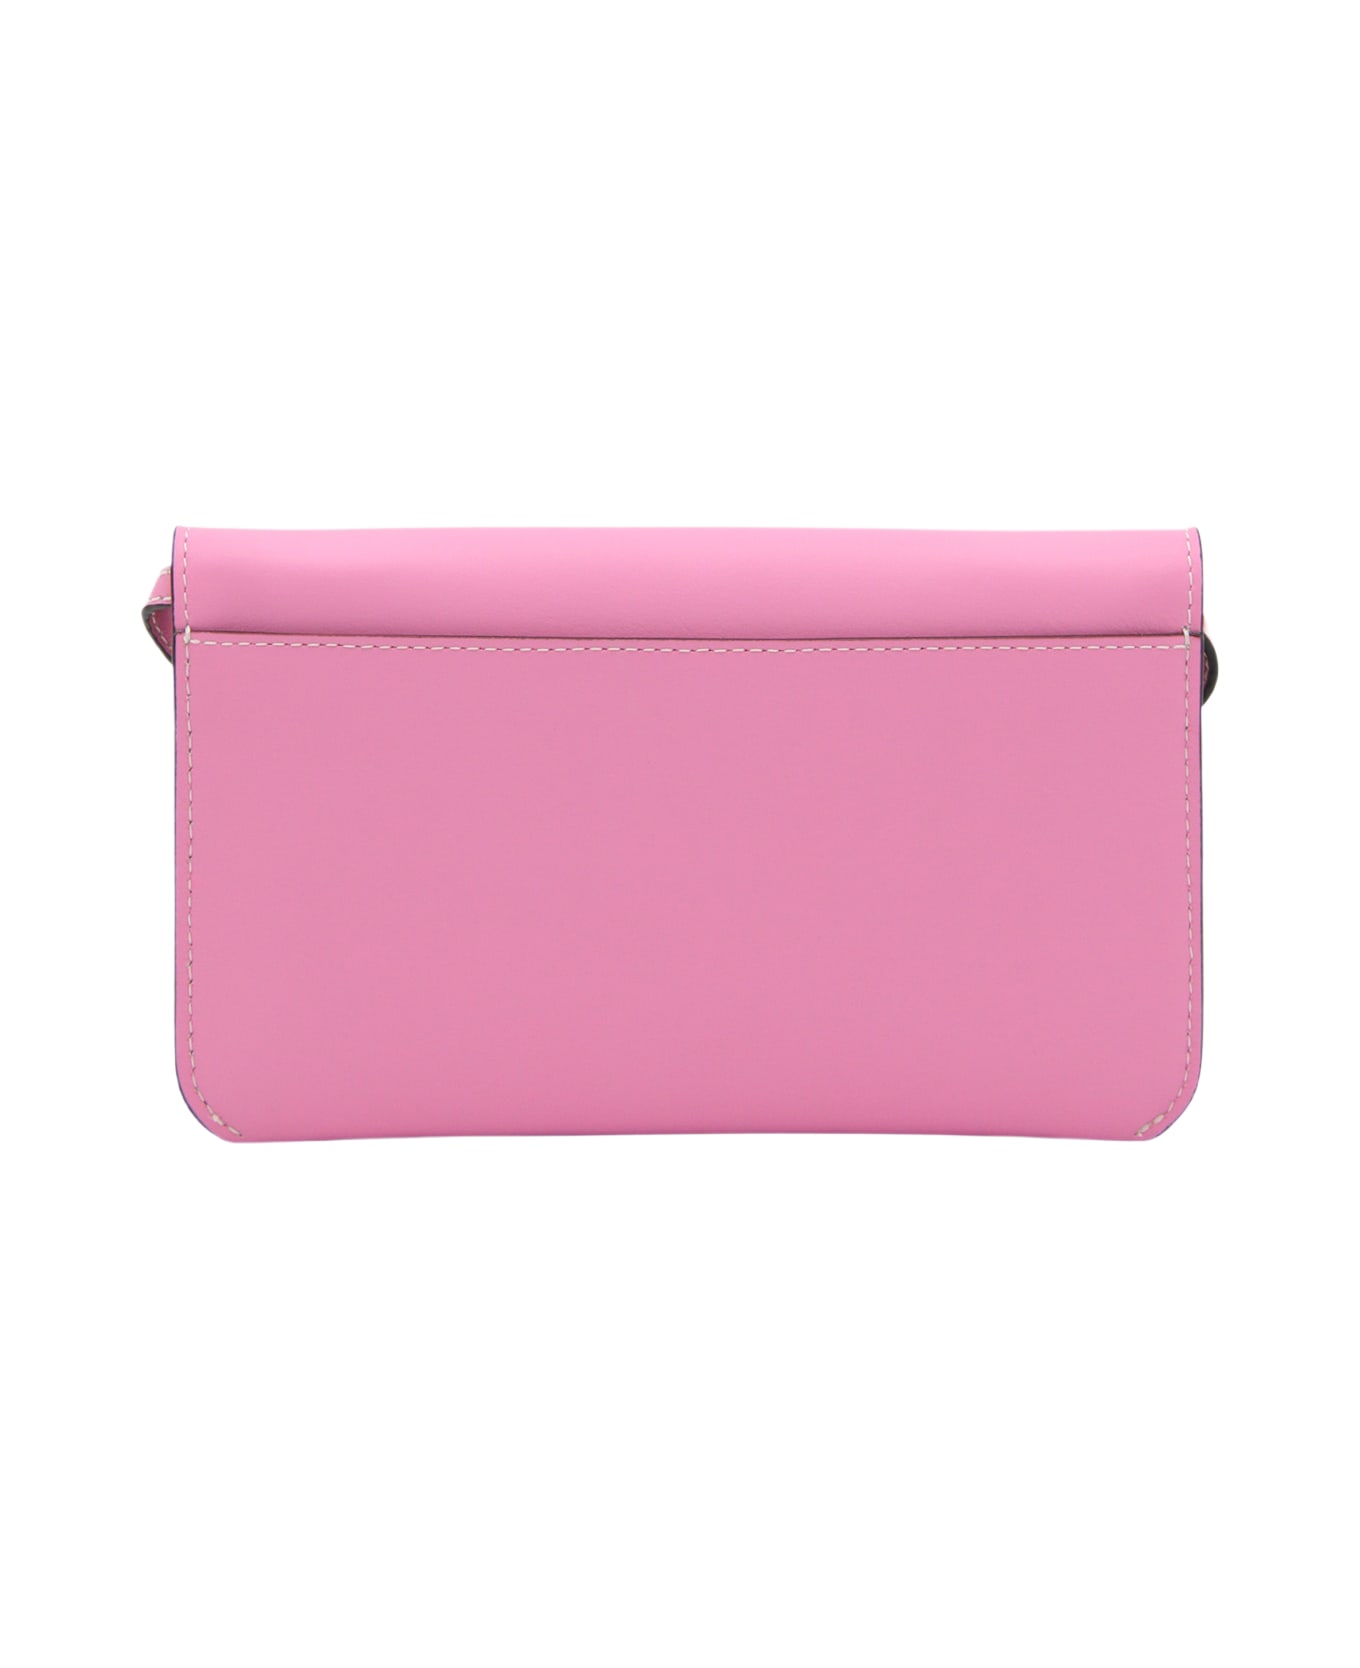 J.W. Anderson Pink Leather Phone Bag - Pink クラッチバッグ